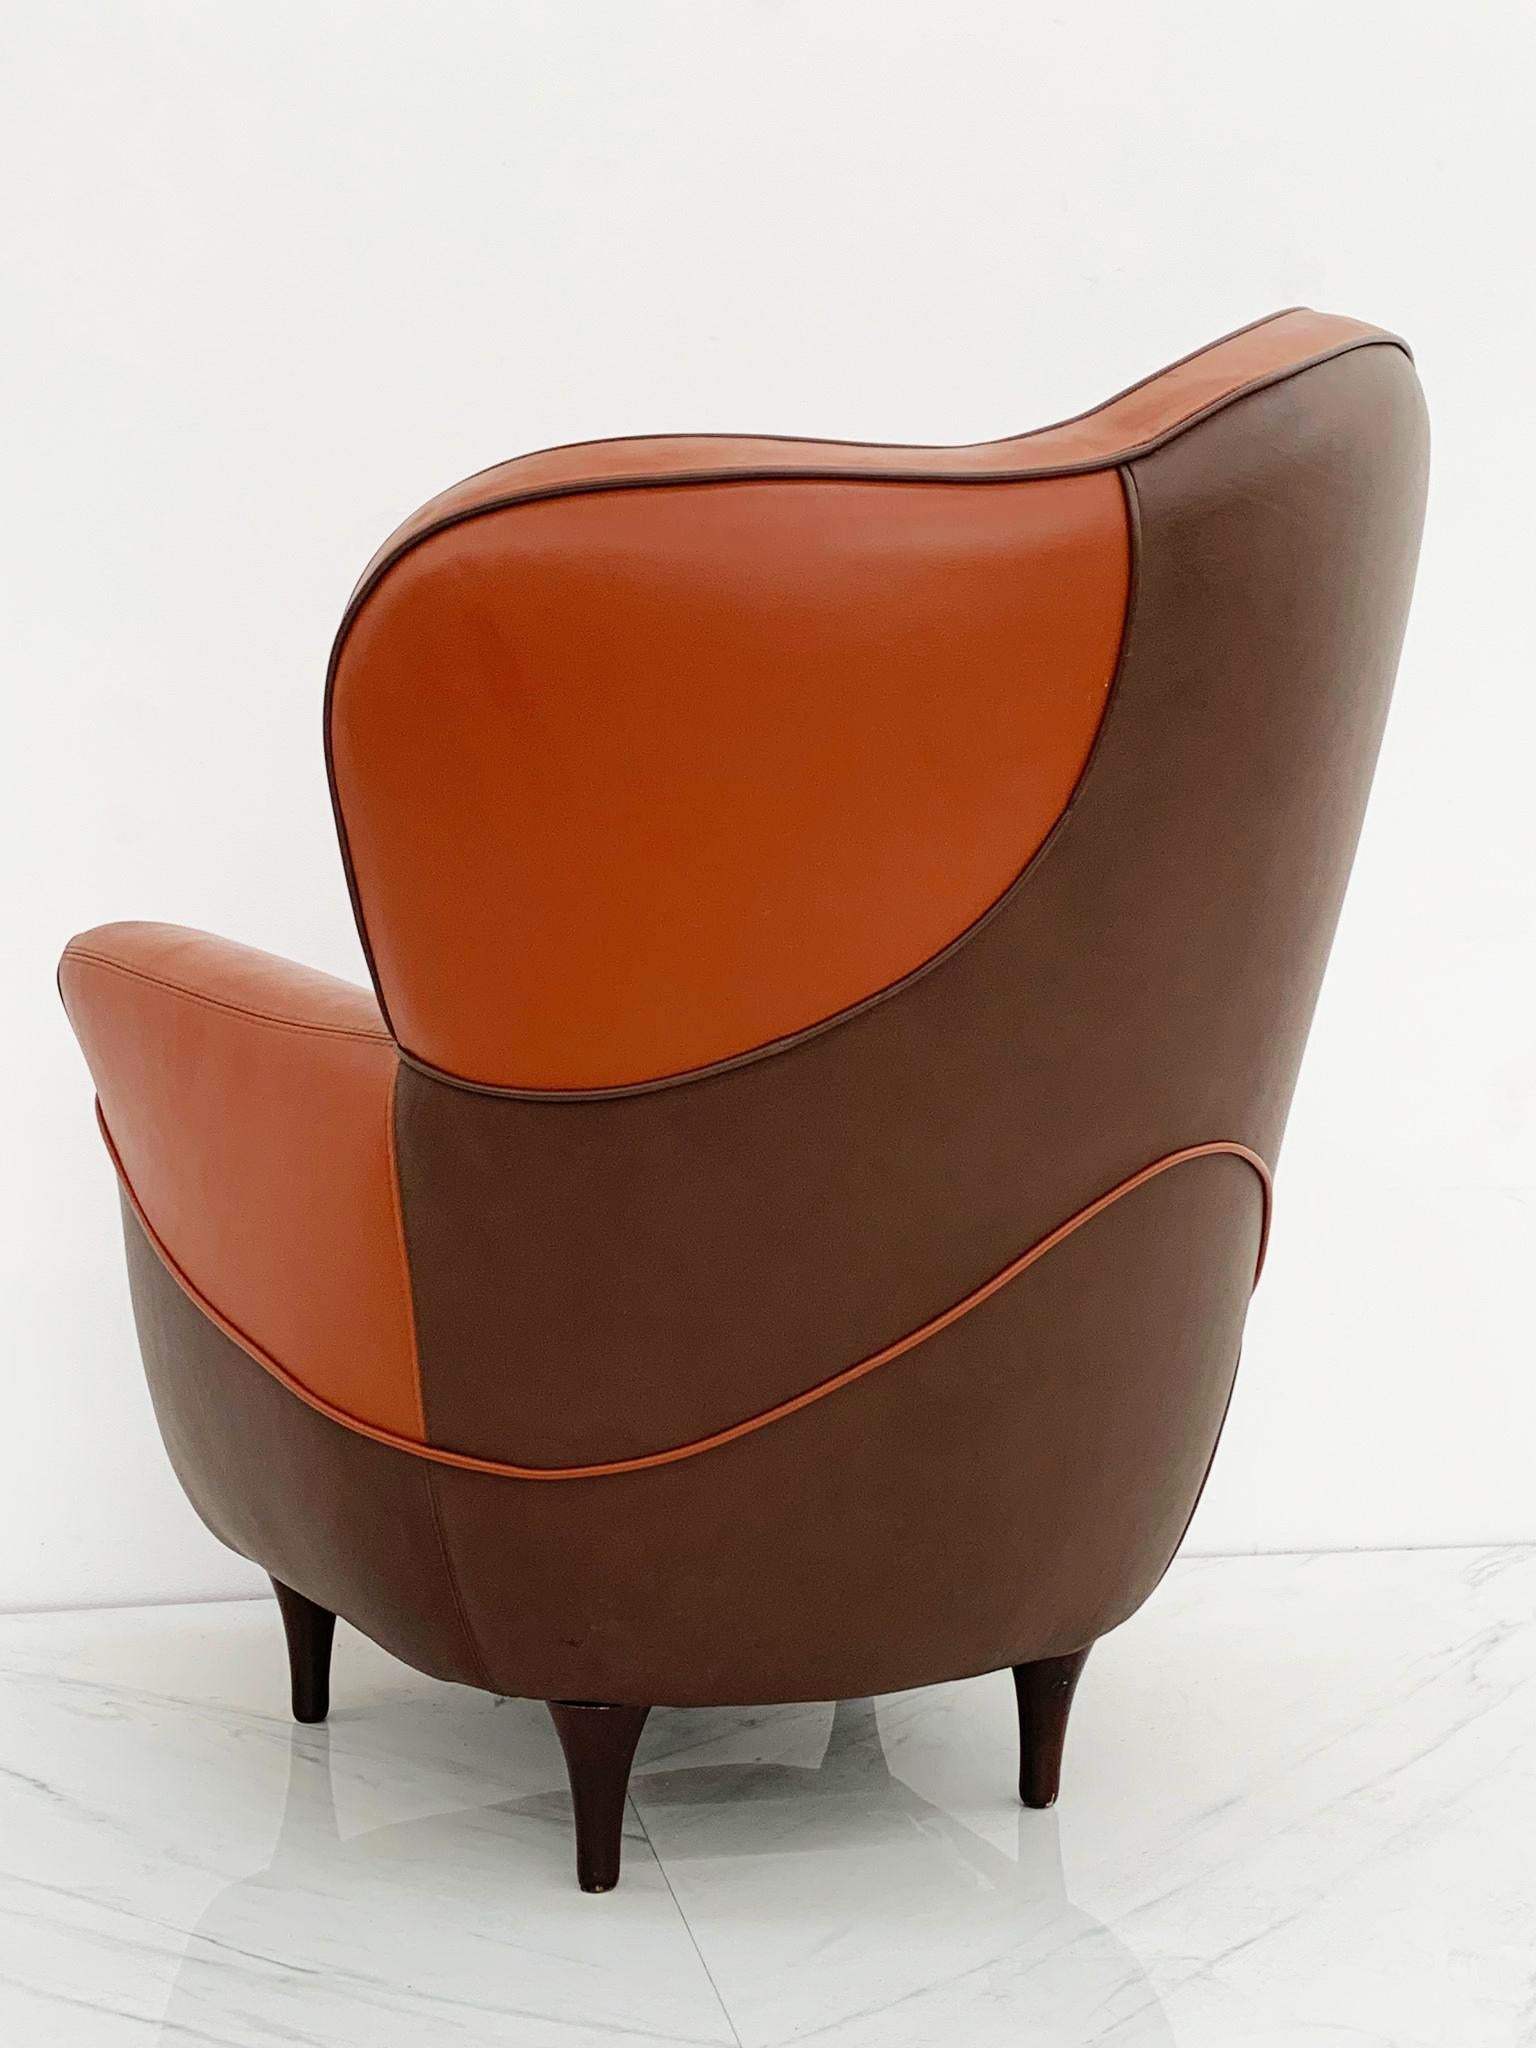 Javier Mariscal Poltrona Moroso Alessandra Leather Lounge Chair, 1995 3